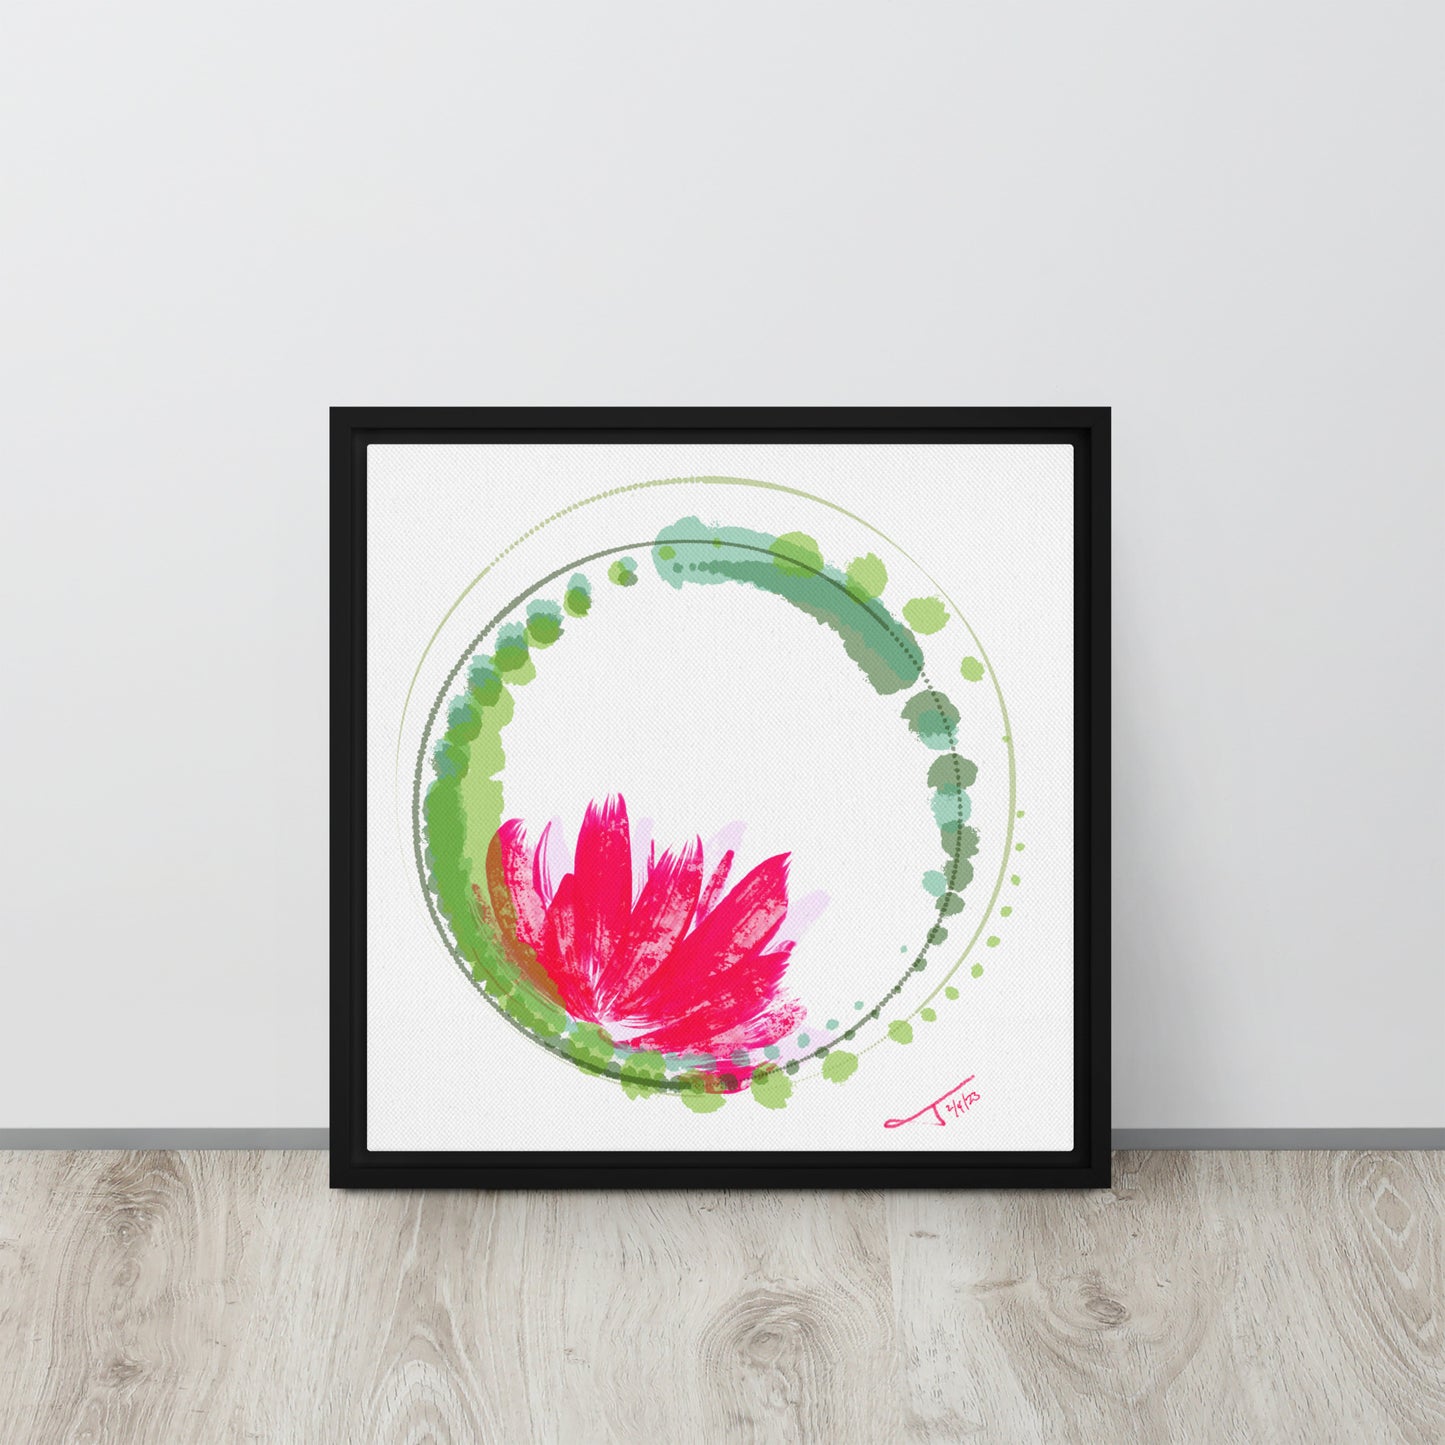 Water Lily (Sage) - Framed canvas